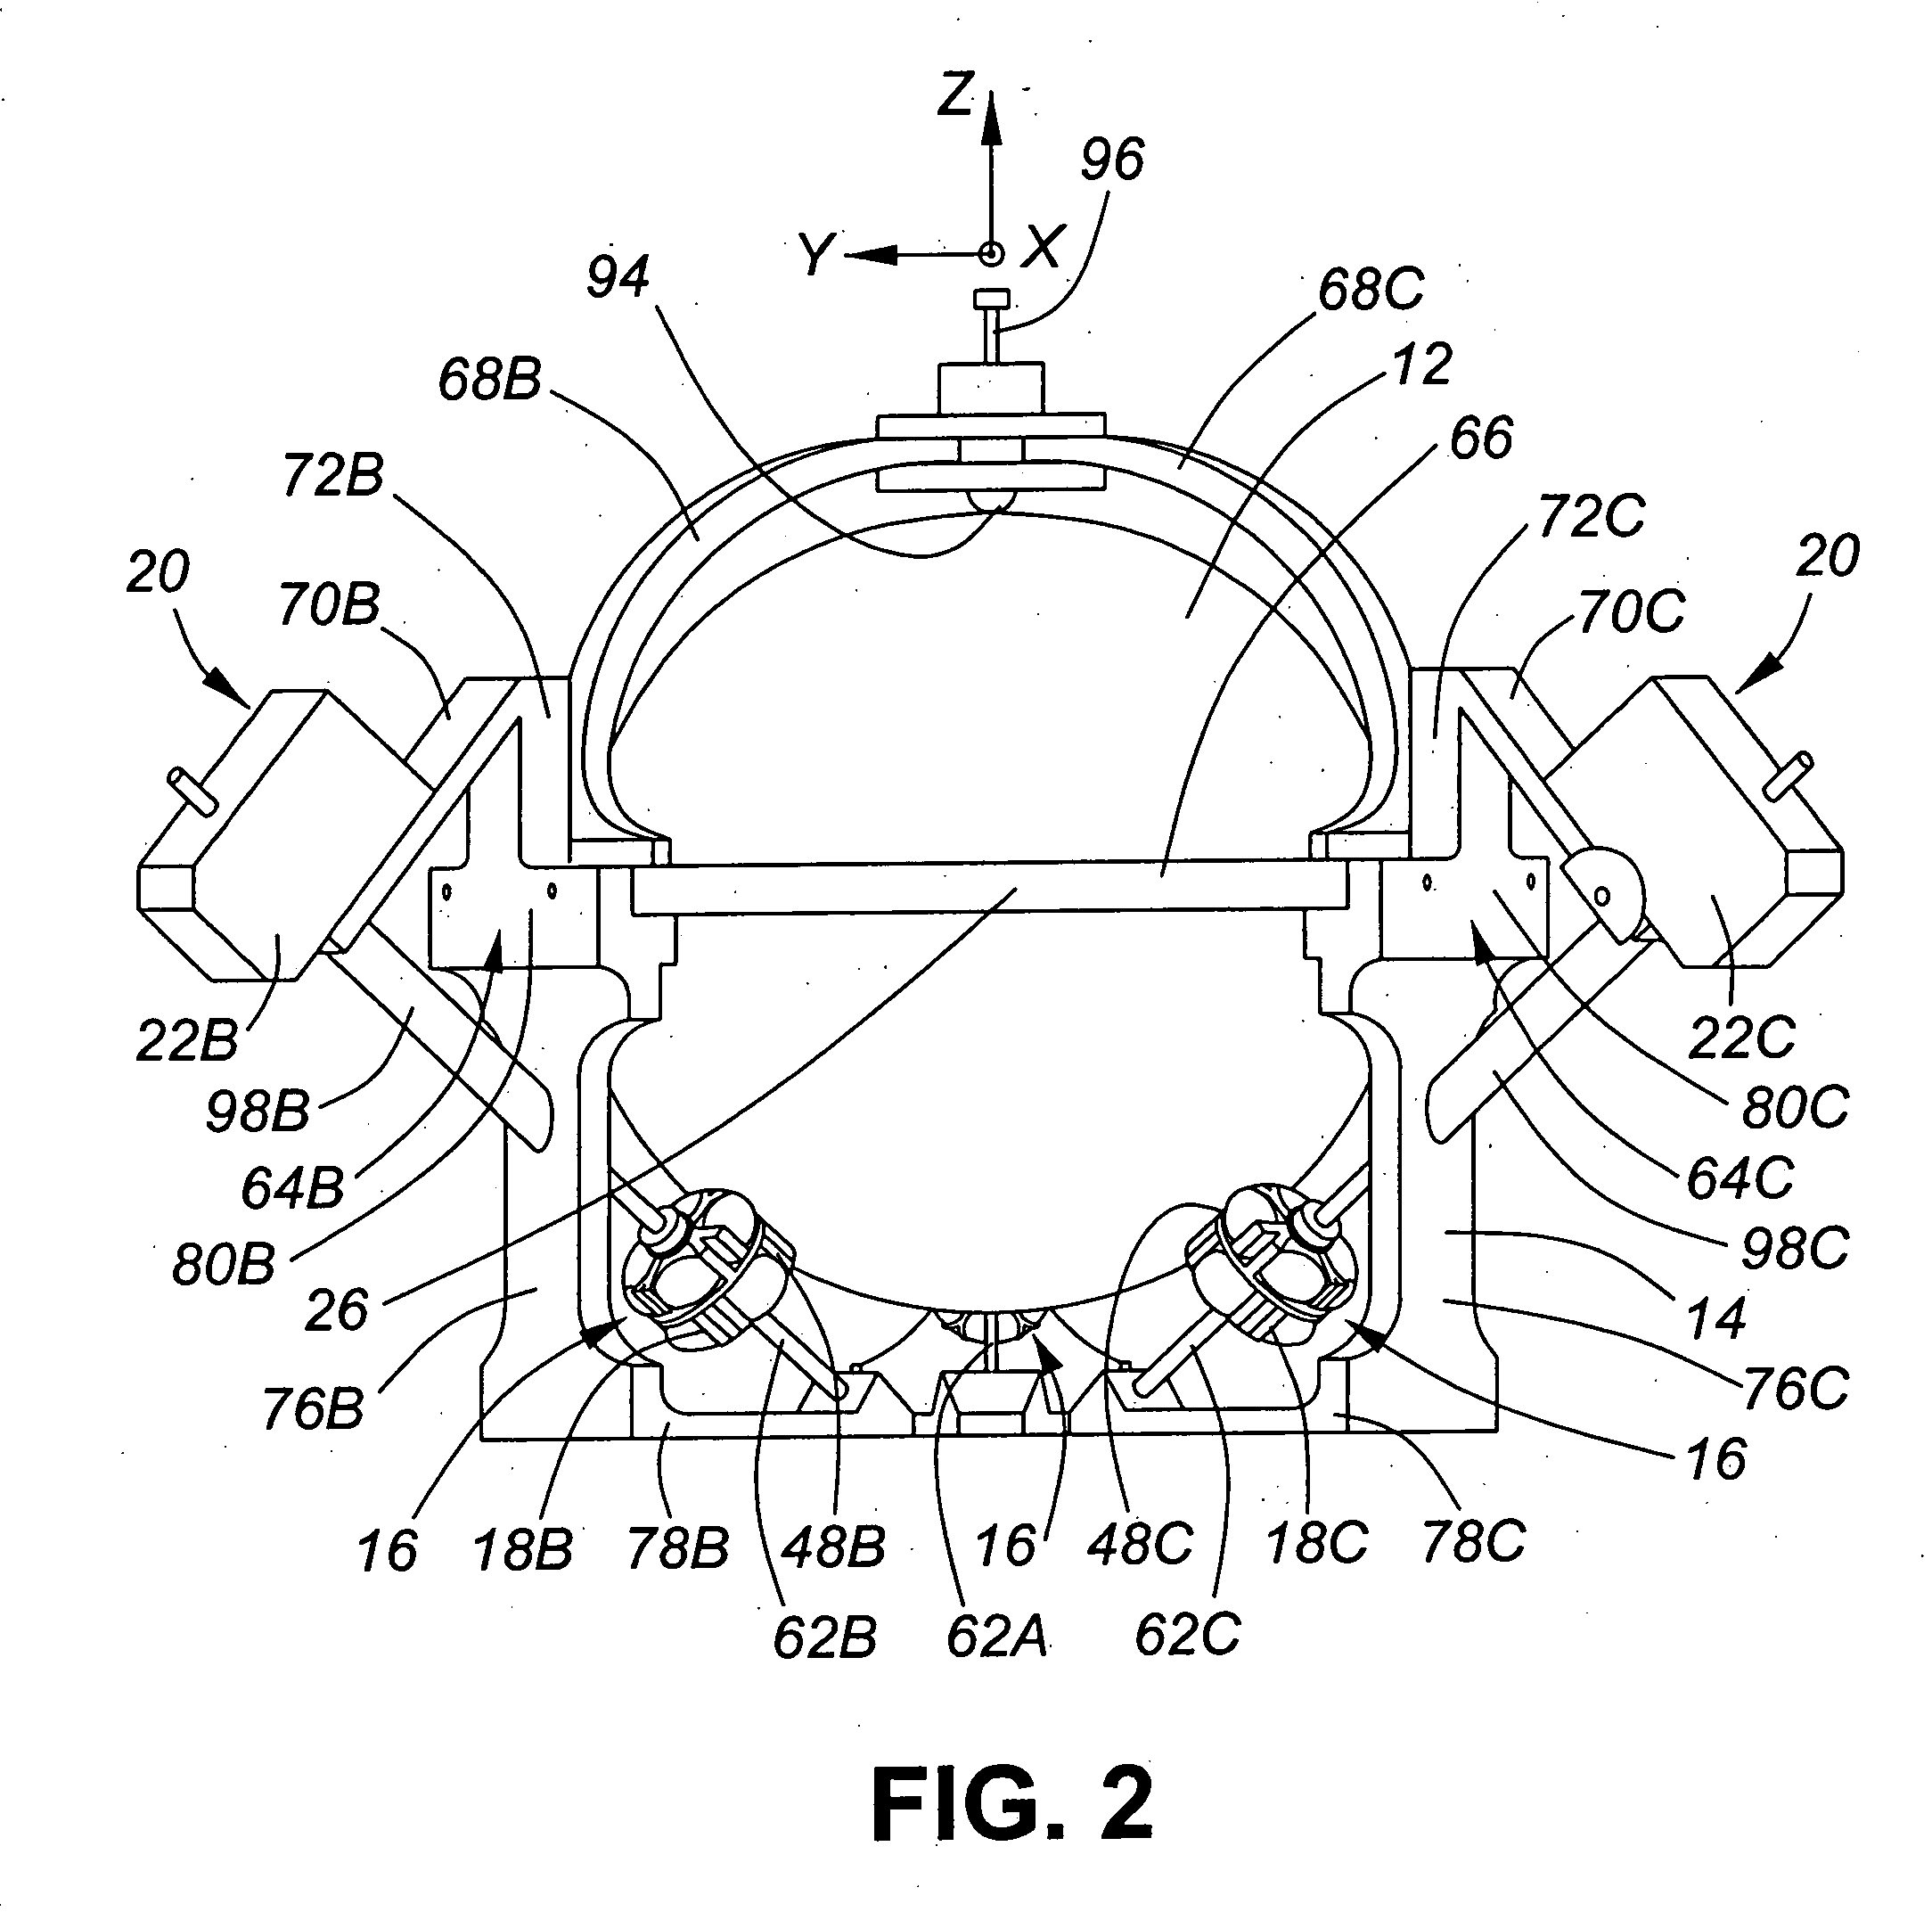 Apparatus for multi-axis rotation and translation